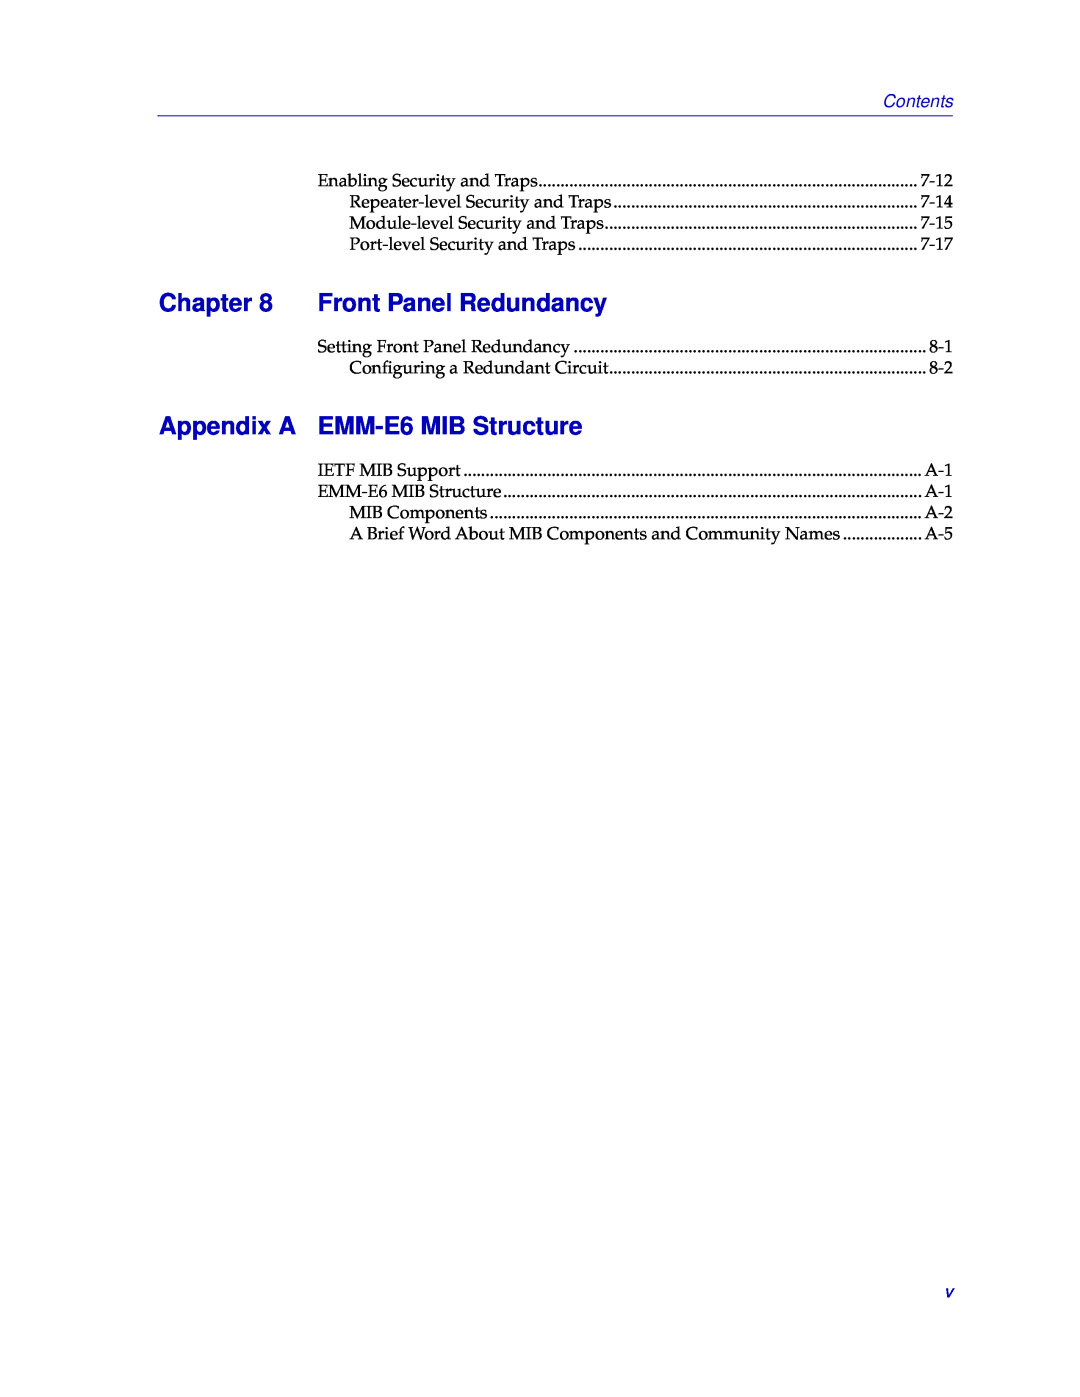 Cabletron Systems manual Front Panel Redundancy, Appendix A EMM-E6 MIB Structure, Chapter, Contents 